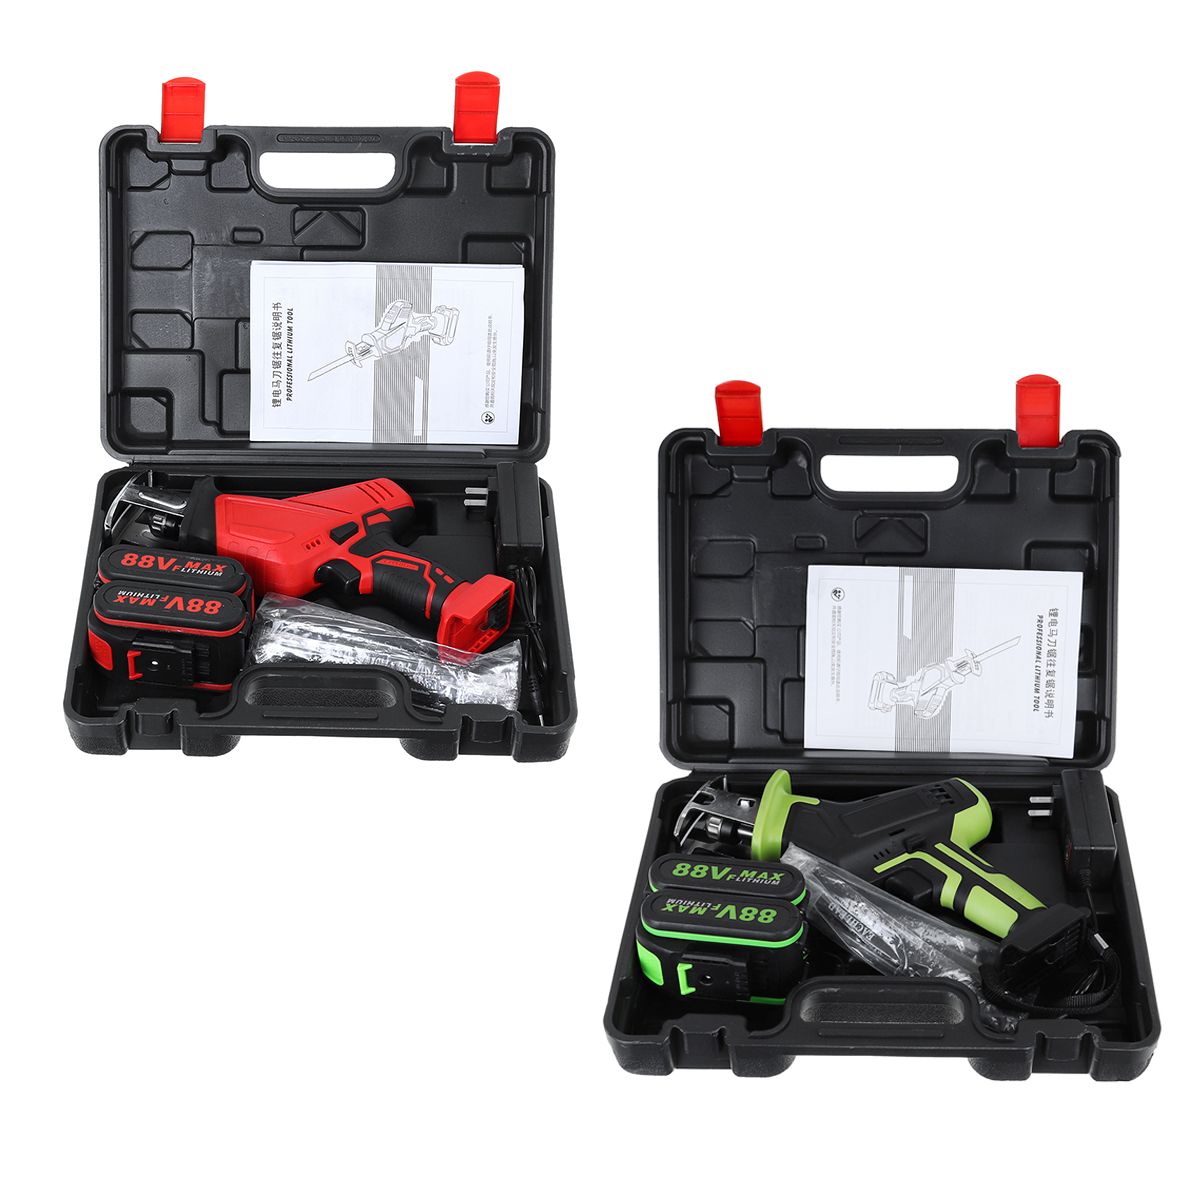 88VF-Cordless-Charging-Reciprocating-Saw-Kit-2-Battery-Modified-Wood-Cutter-Set-1670502